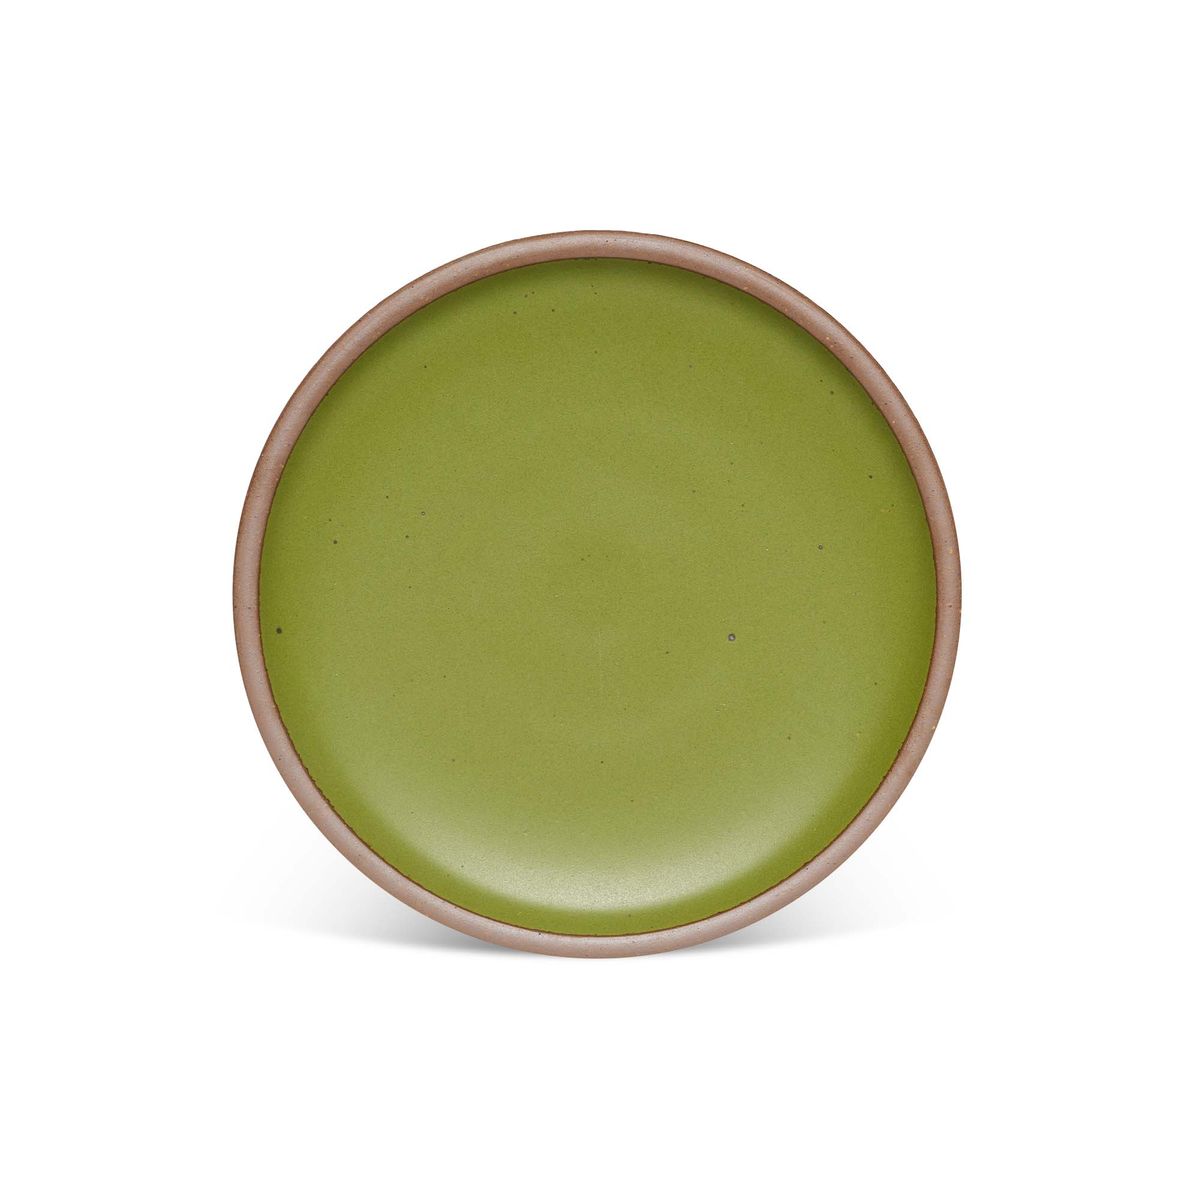 Dinner Plate in Fiddlehead, a mossy, olive green.